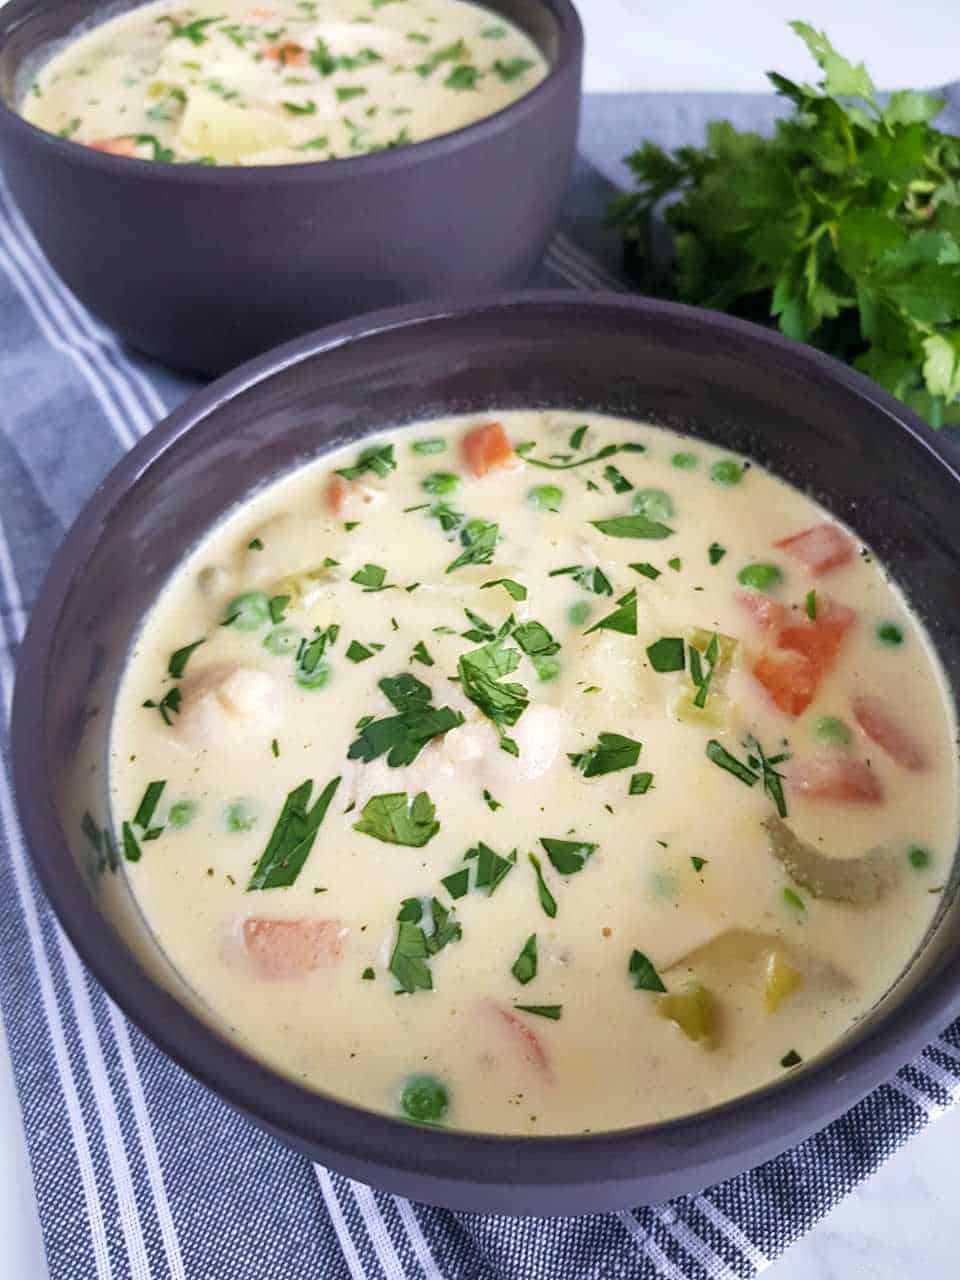 creamy chicken and vegetable soup in gray bowls on a gray table cloth.